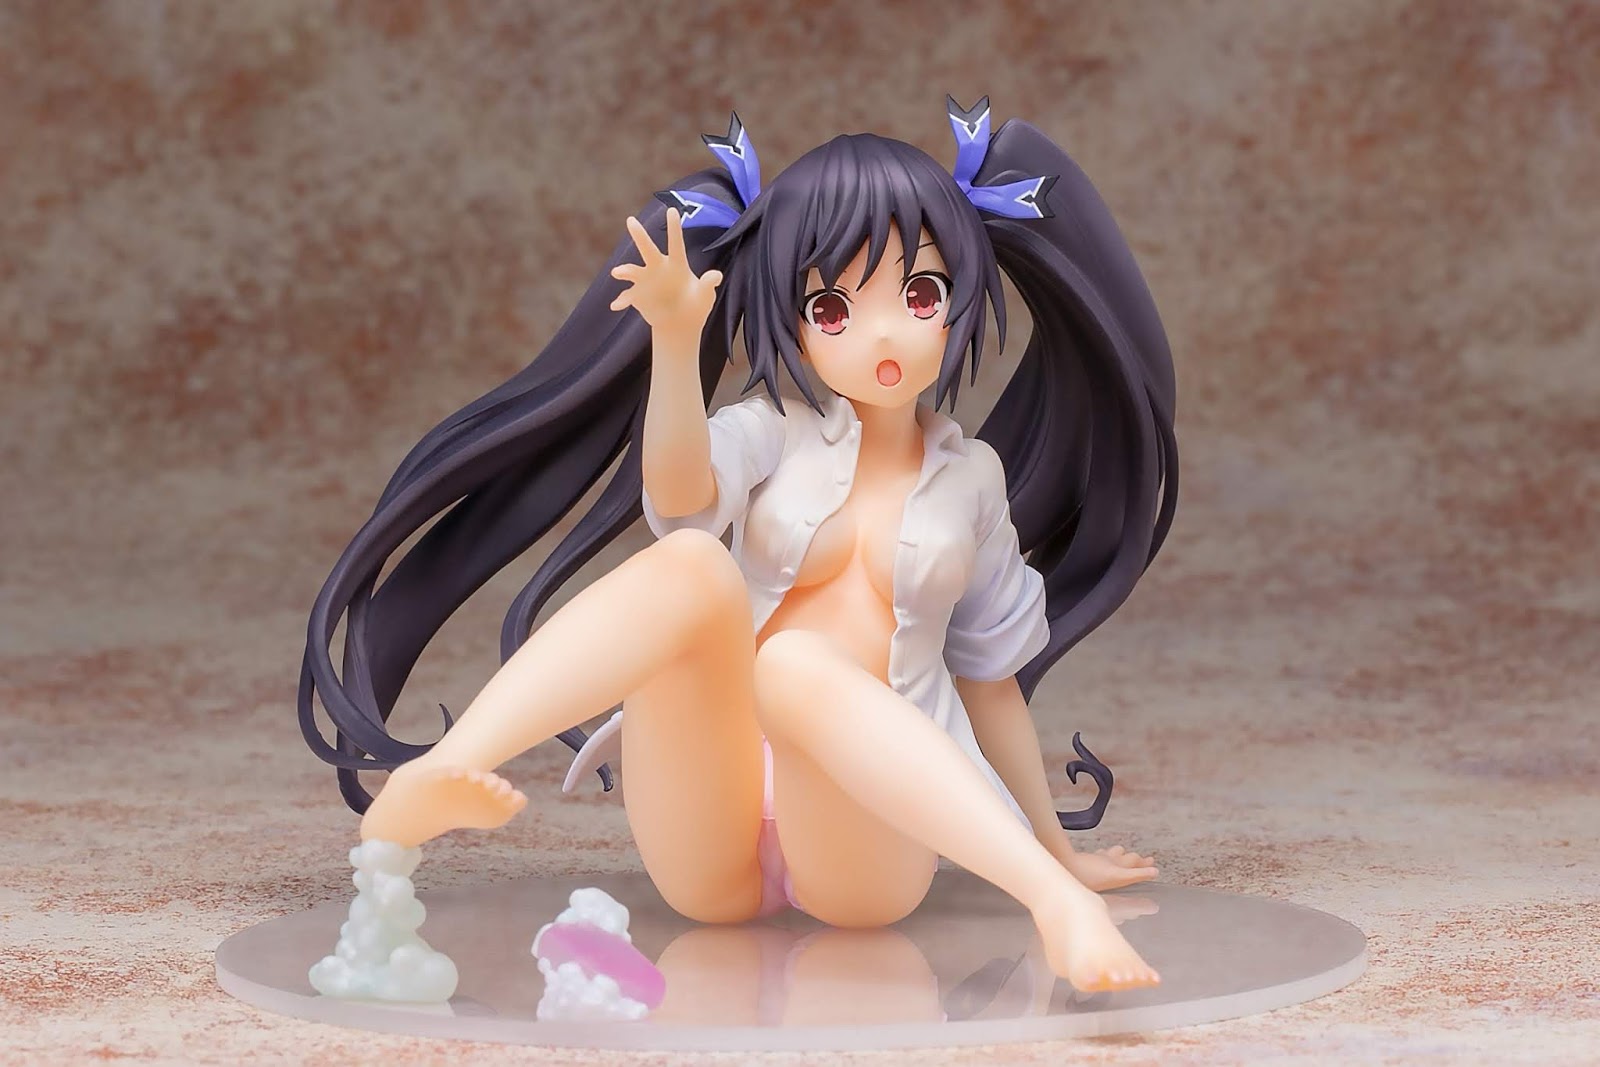 Naked anime figures uncensored - 🧡 pc_detail_14.jpg MyFigureCollection.net...